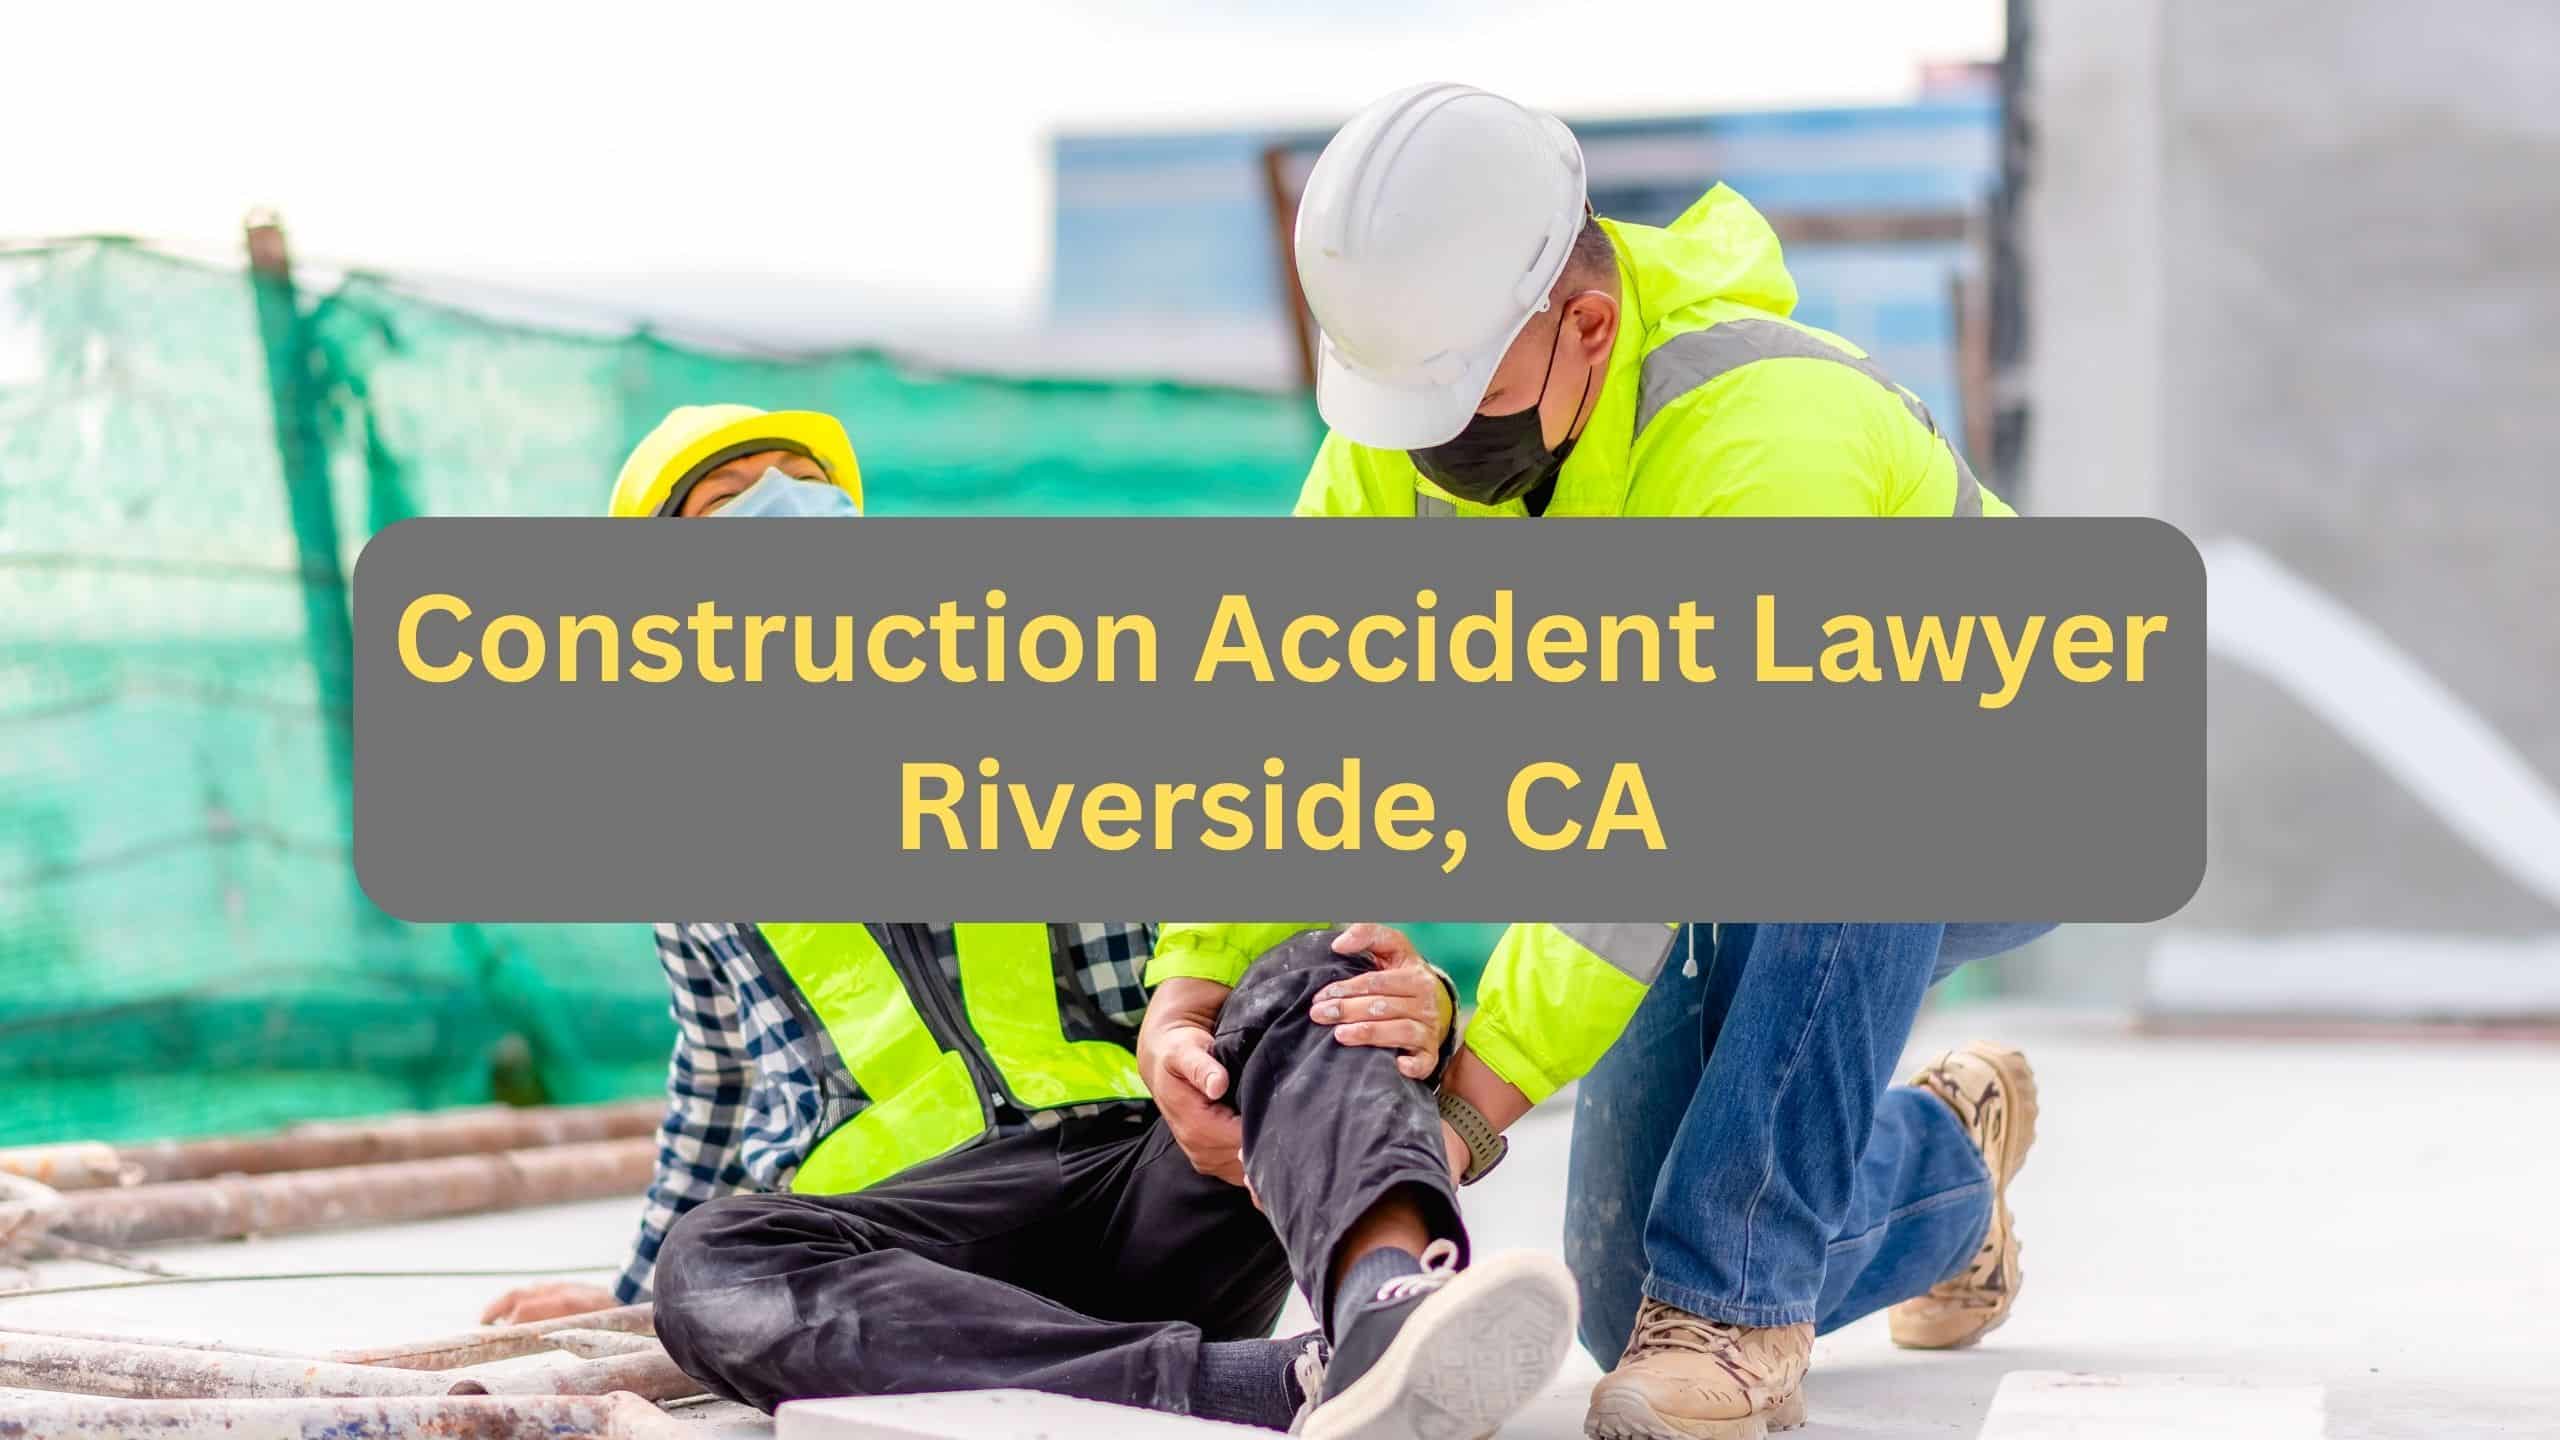 Construction Accident Lawyers Riverside